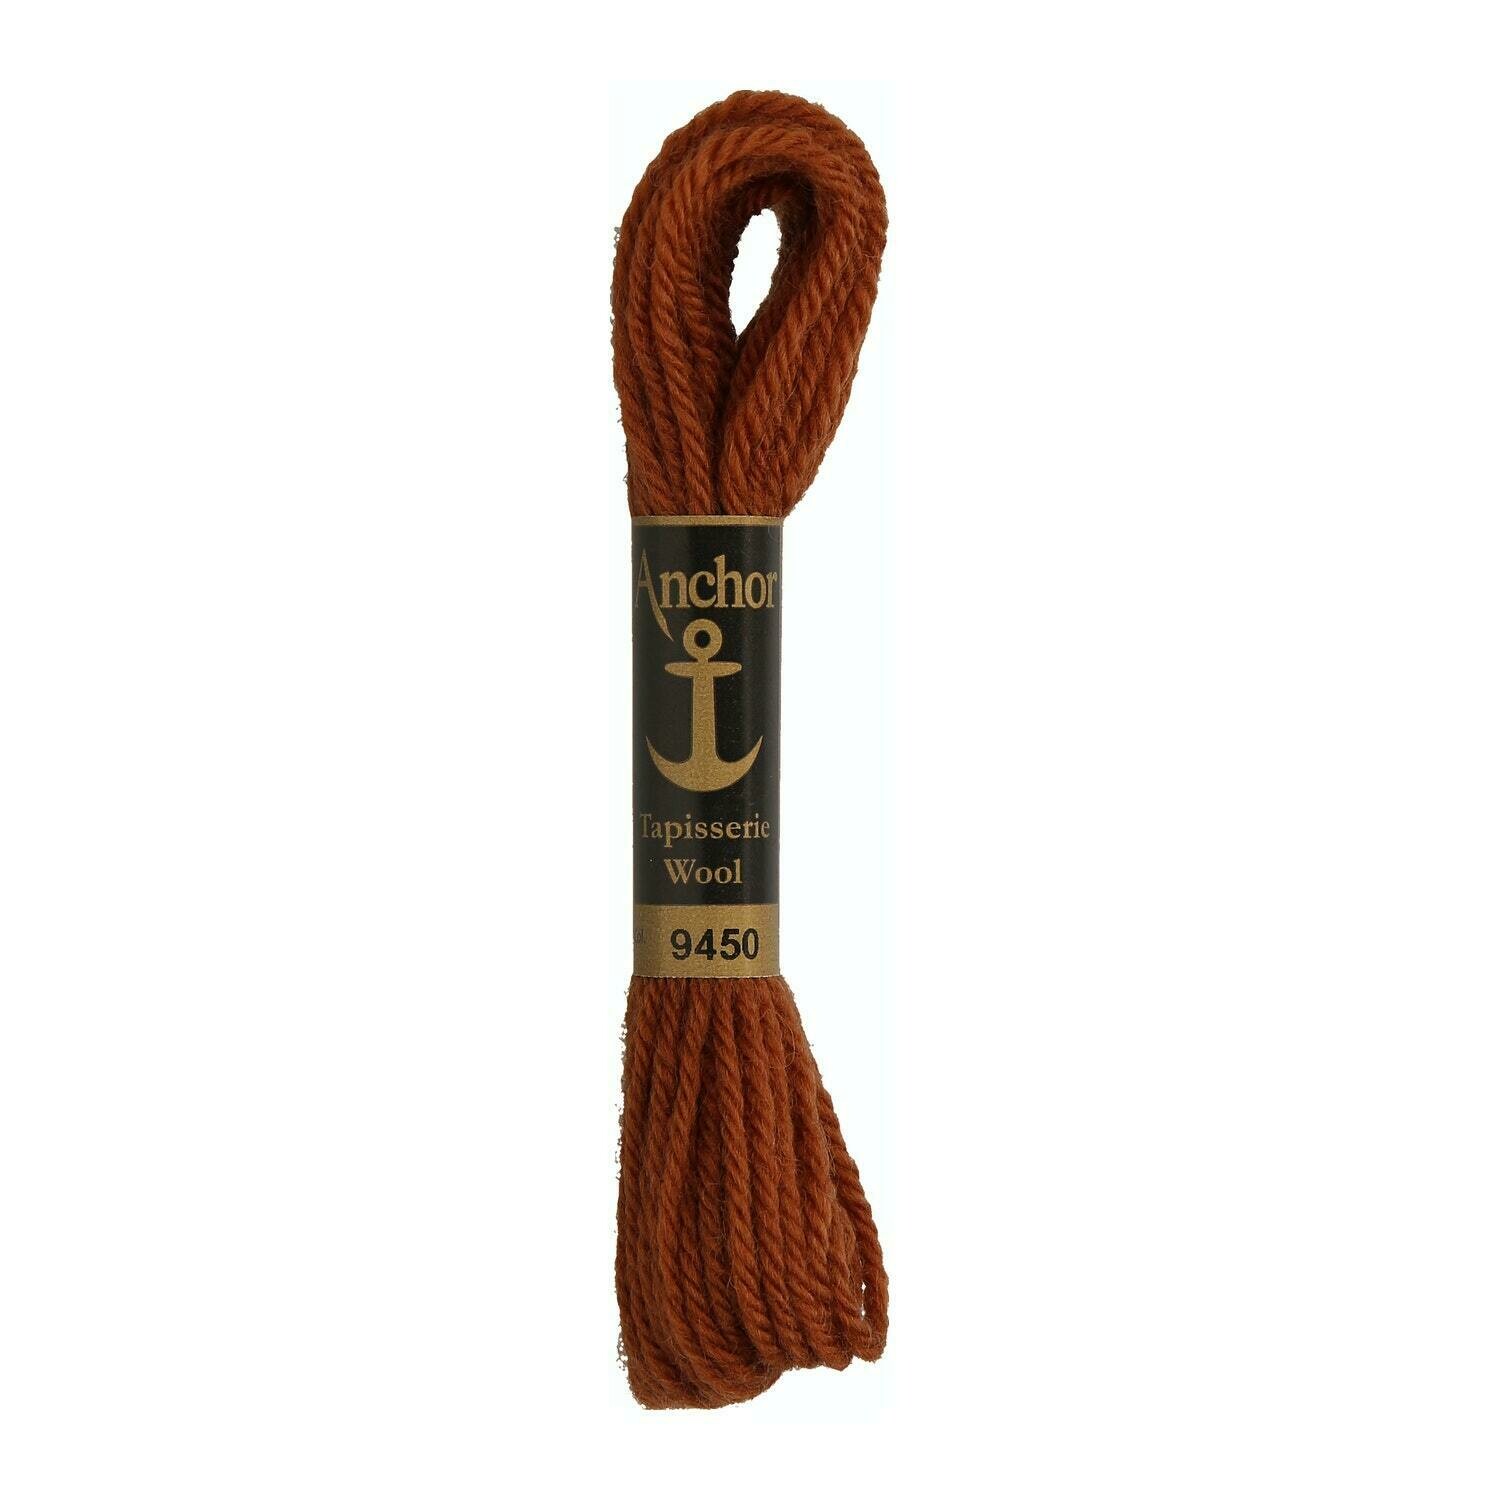 Anchor Tapisserie Wool #09450